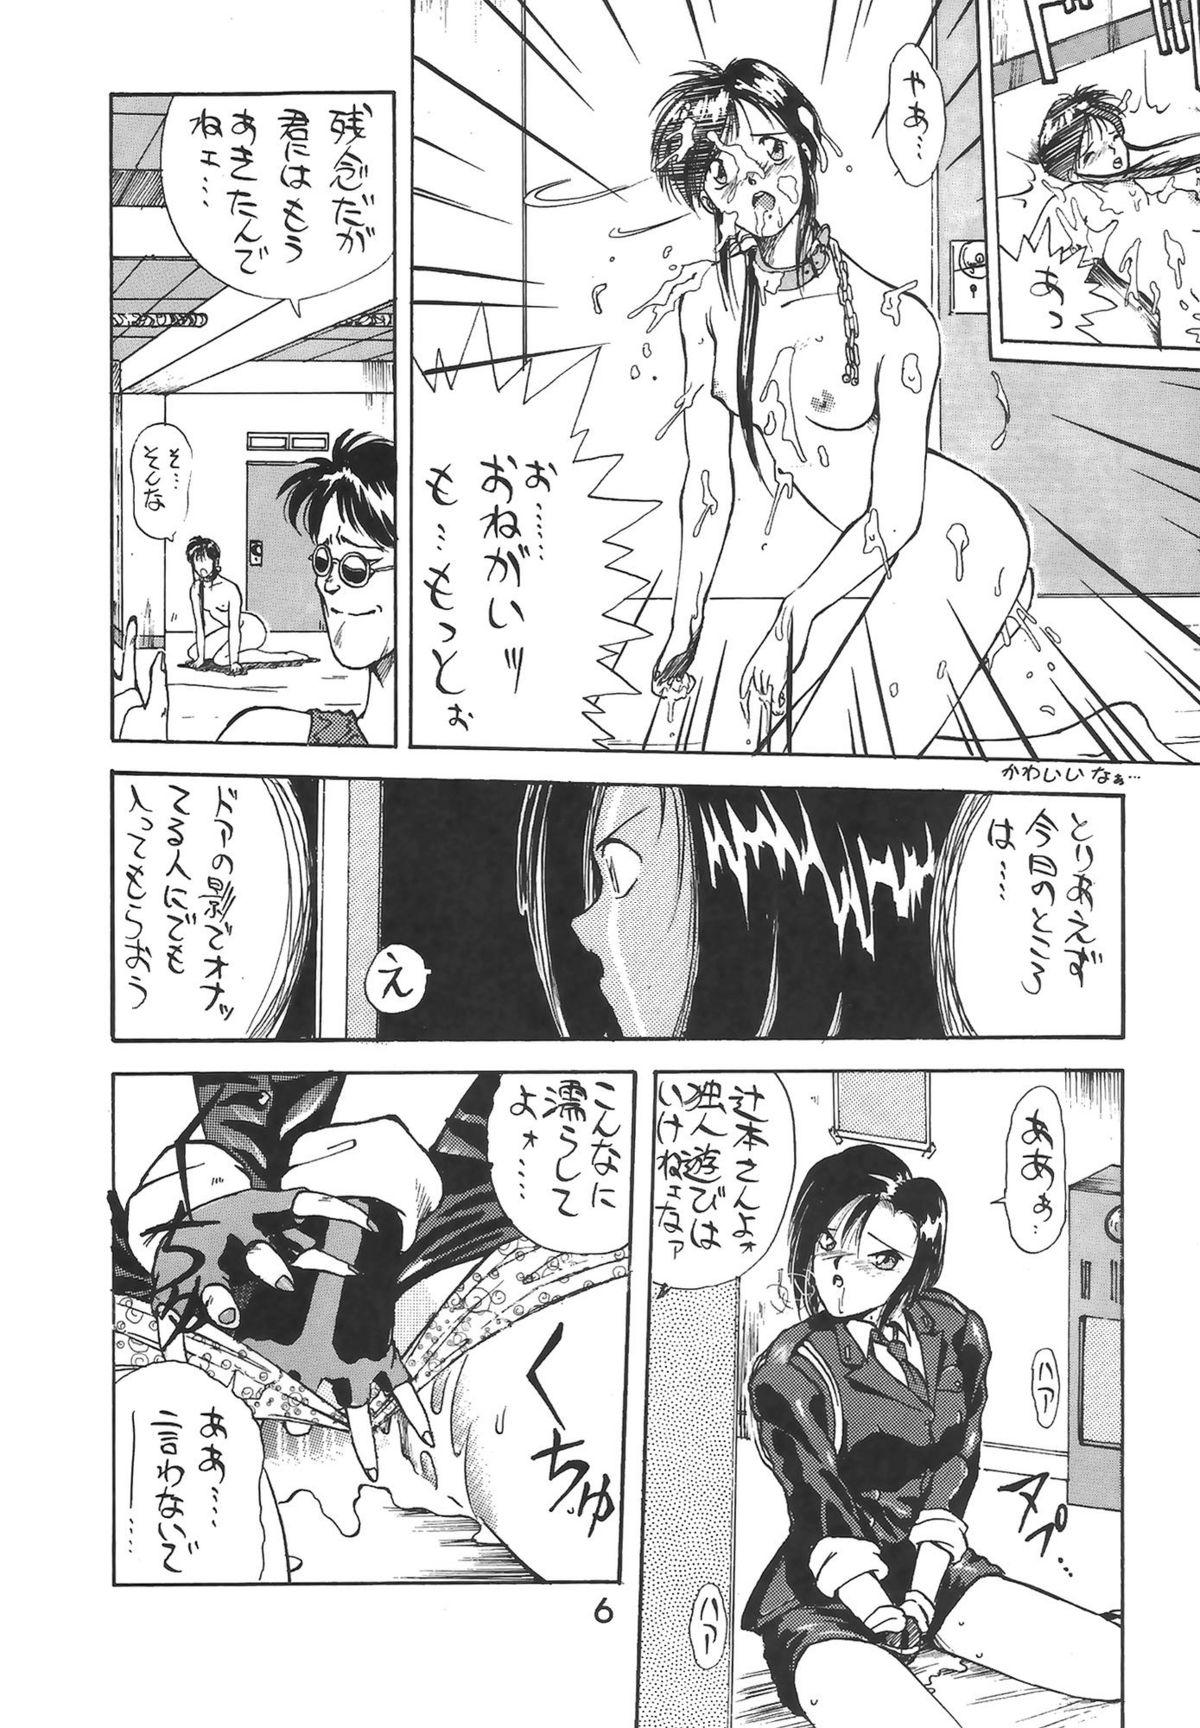 Farting Madonna Special 2 - Ah my goddess Youre under arrest Atm - Page 6